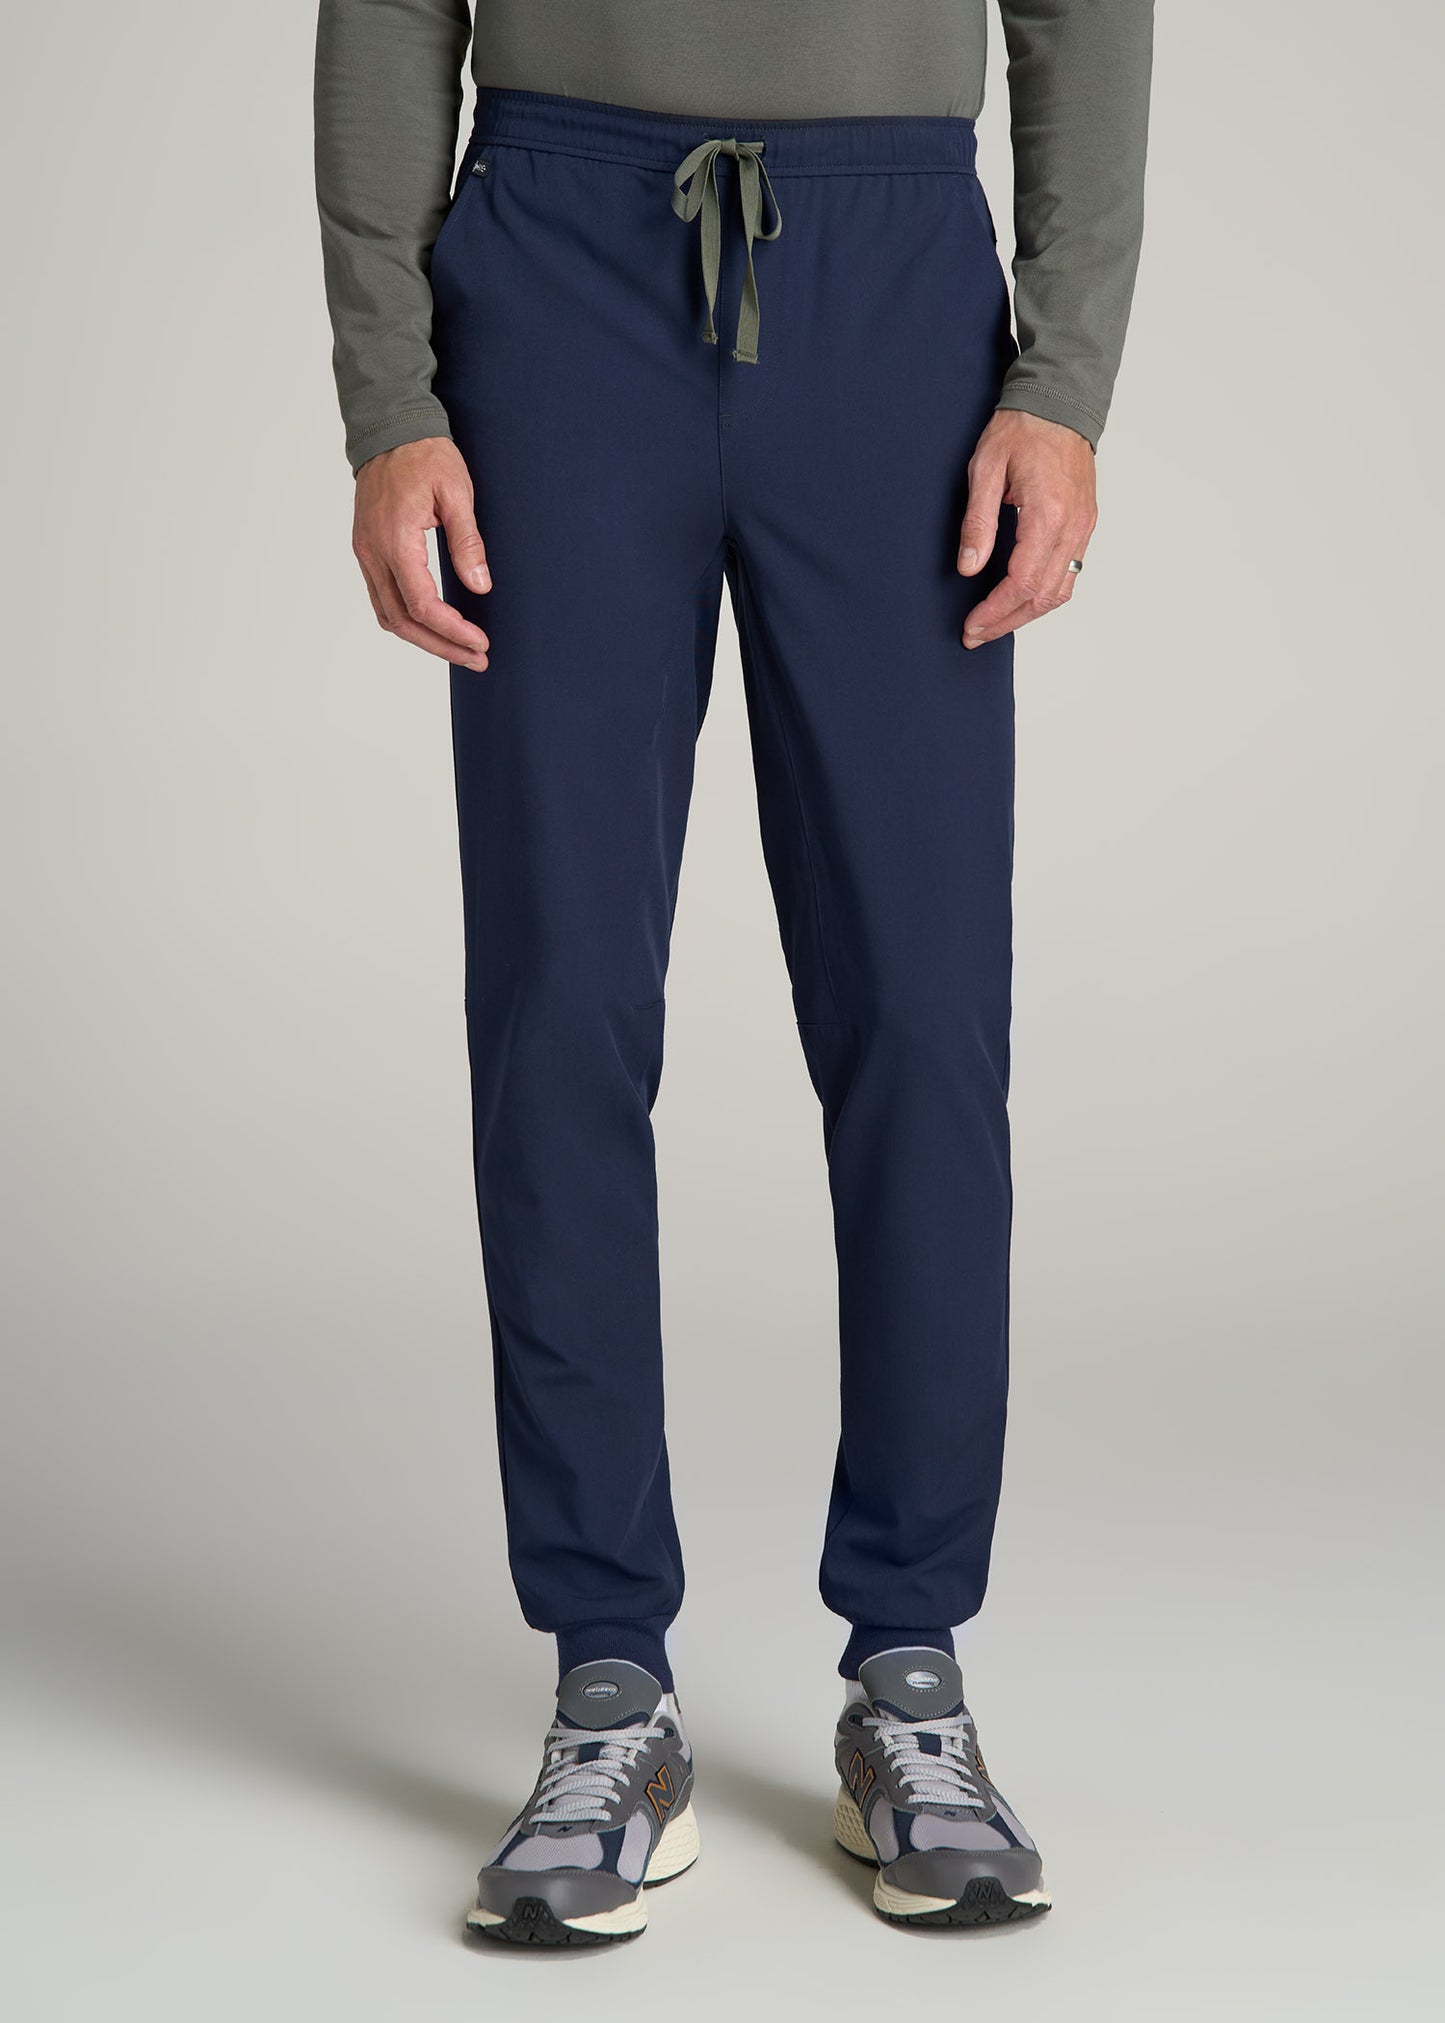 Scrub Joggers for Tall Men in Patriot Blue